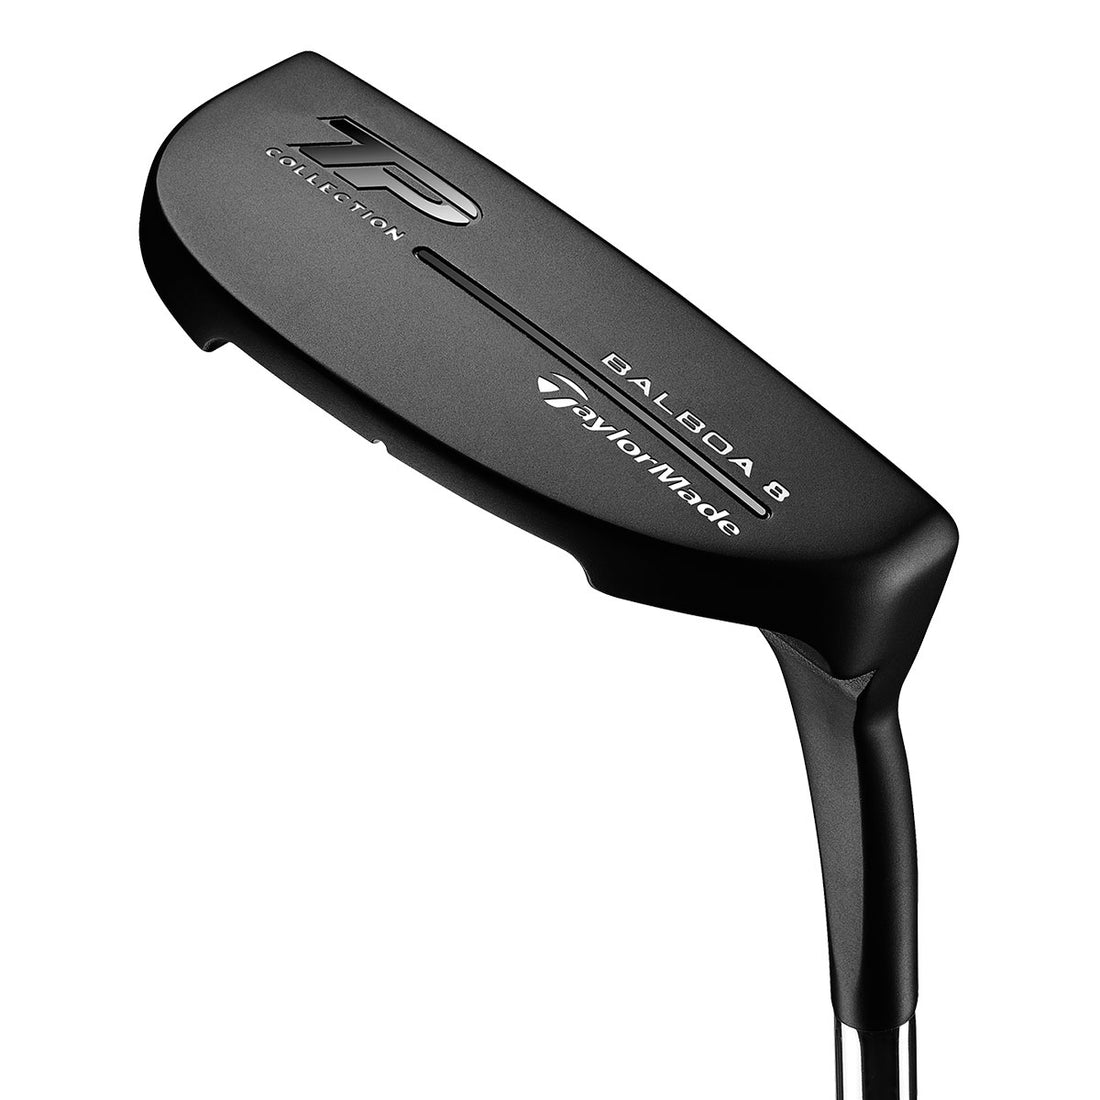 TAYLORMADE TP BLACK COLLECTION BALBOA #8 PUTTER